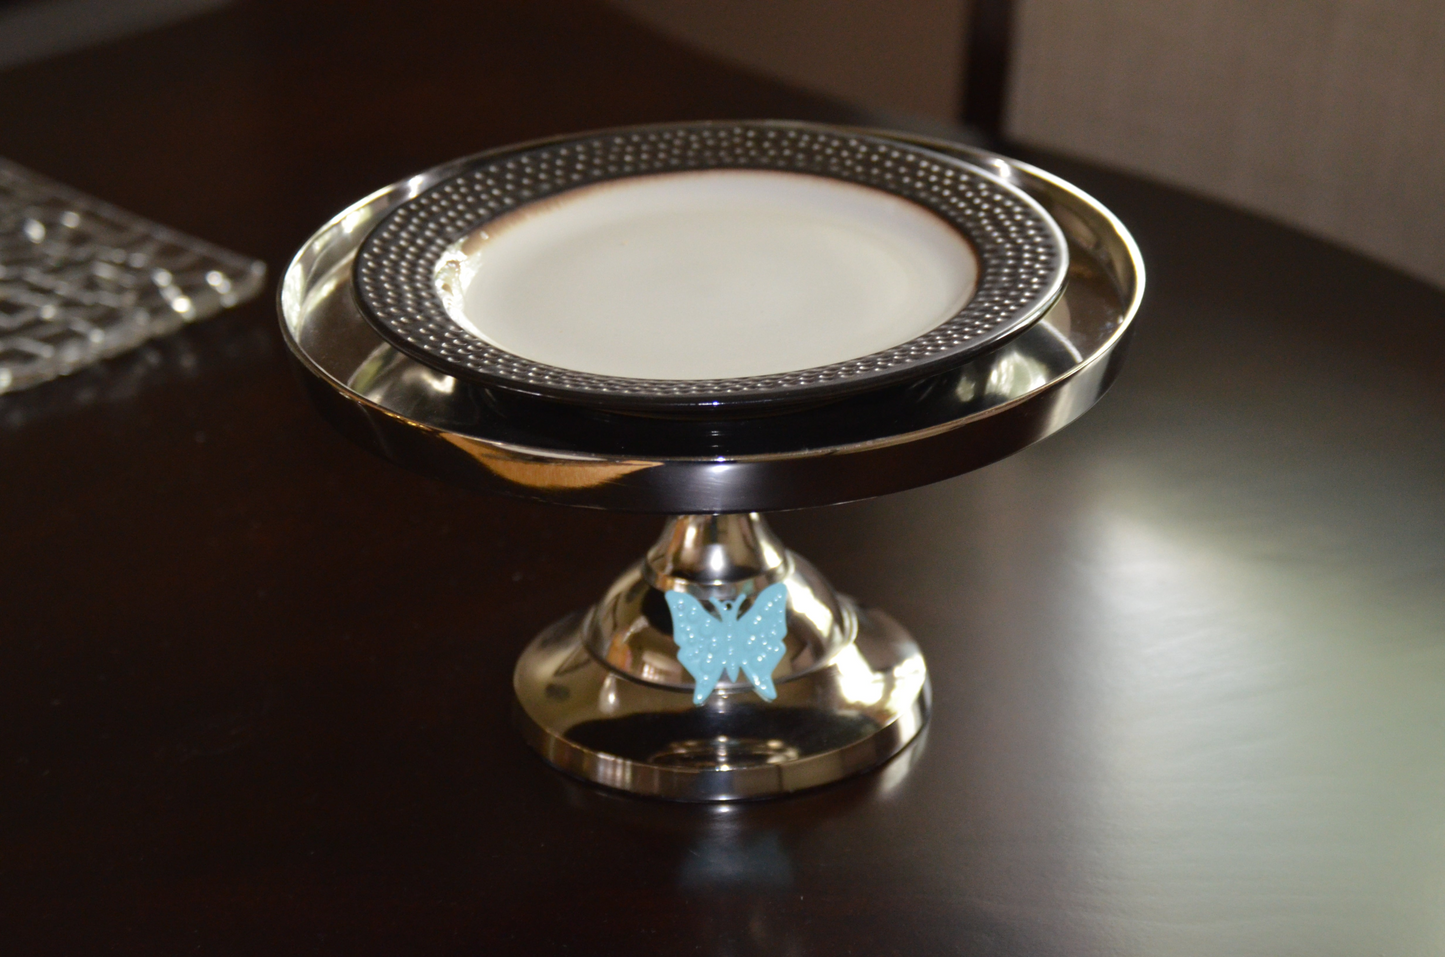 Cake Stand with Turquoise Butterfly (10" Cake Holder)